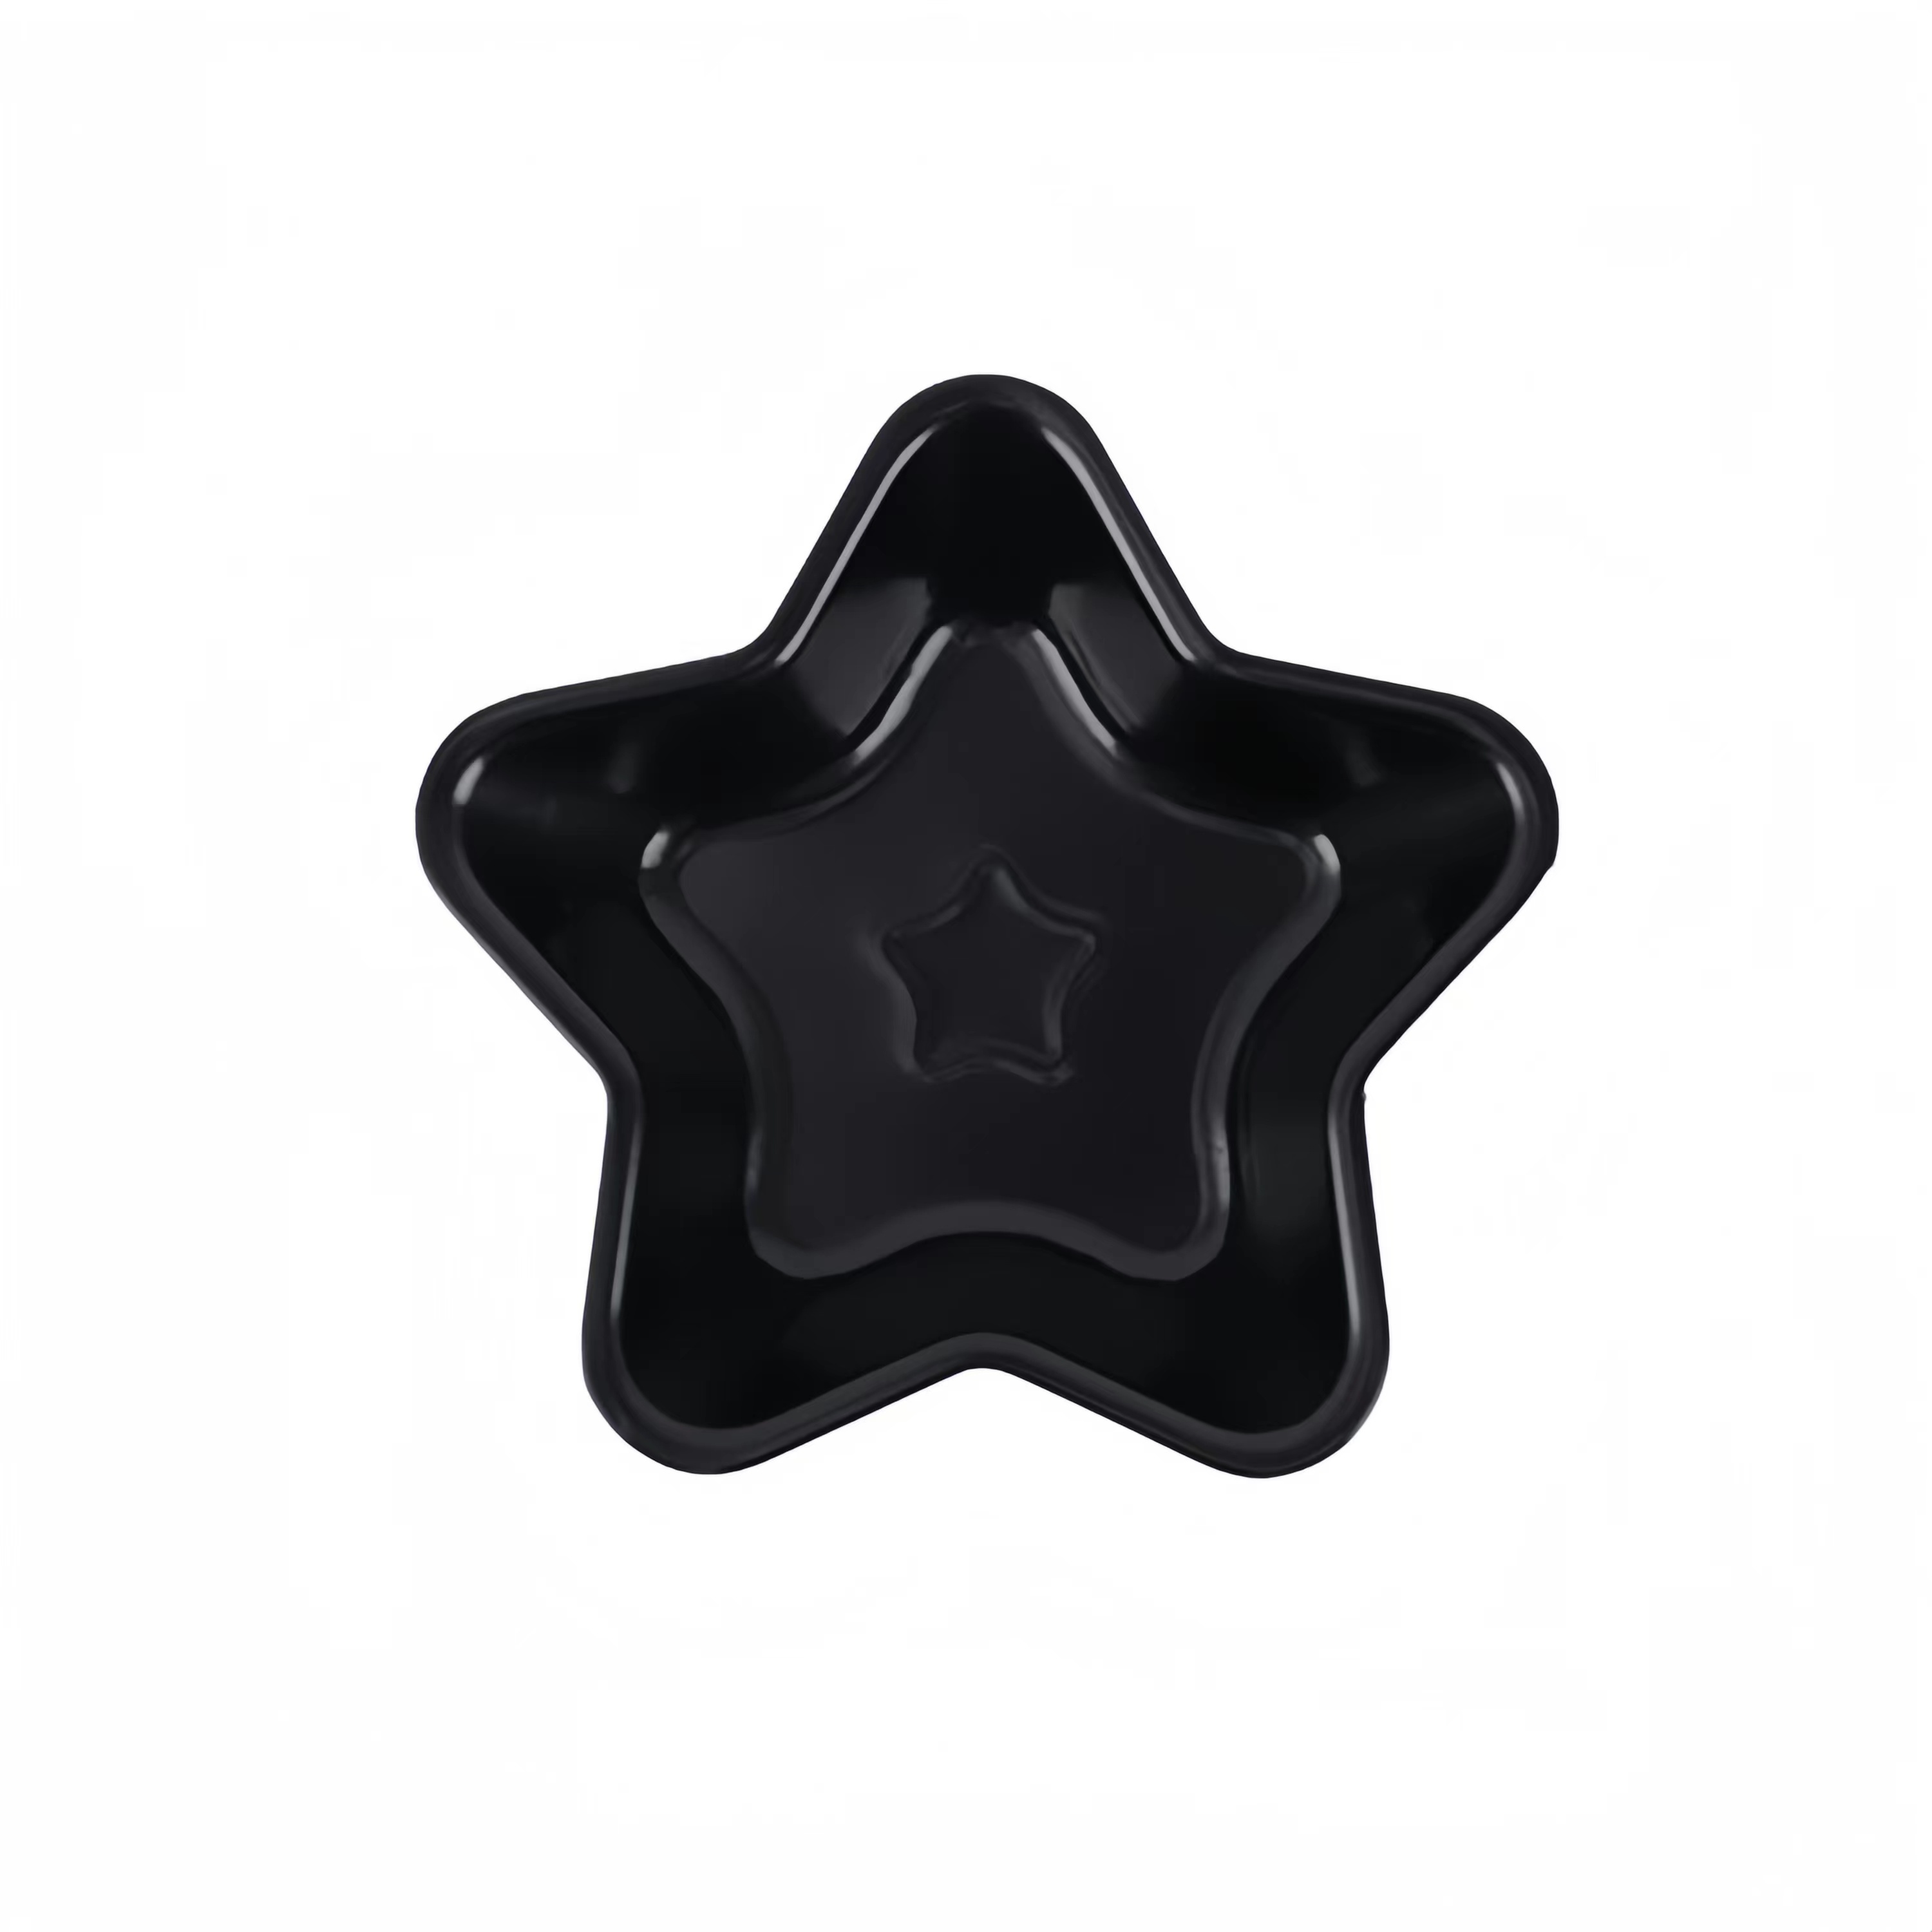 1pc Five-Pointed Star Shape Non-Stick Carbon Steel Pizza Pan, Cake